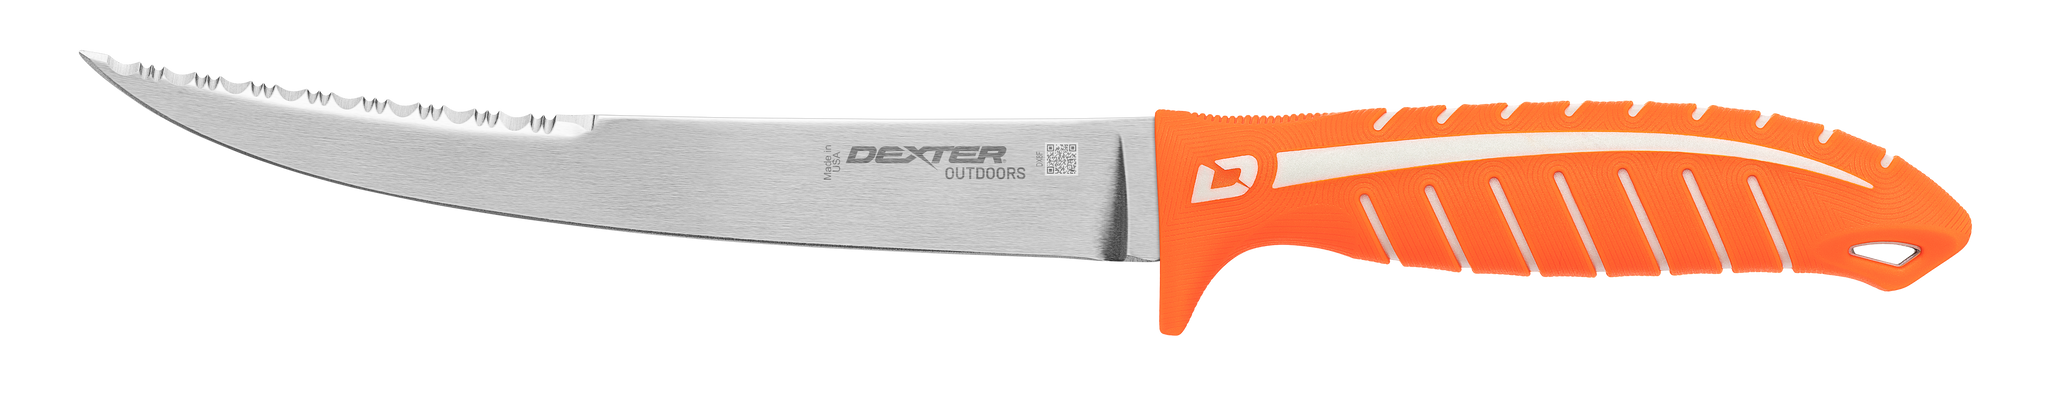 Dexter Outdoors DEXTREME Dual Edge 8" Flexible Fillet Knife with Sheath